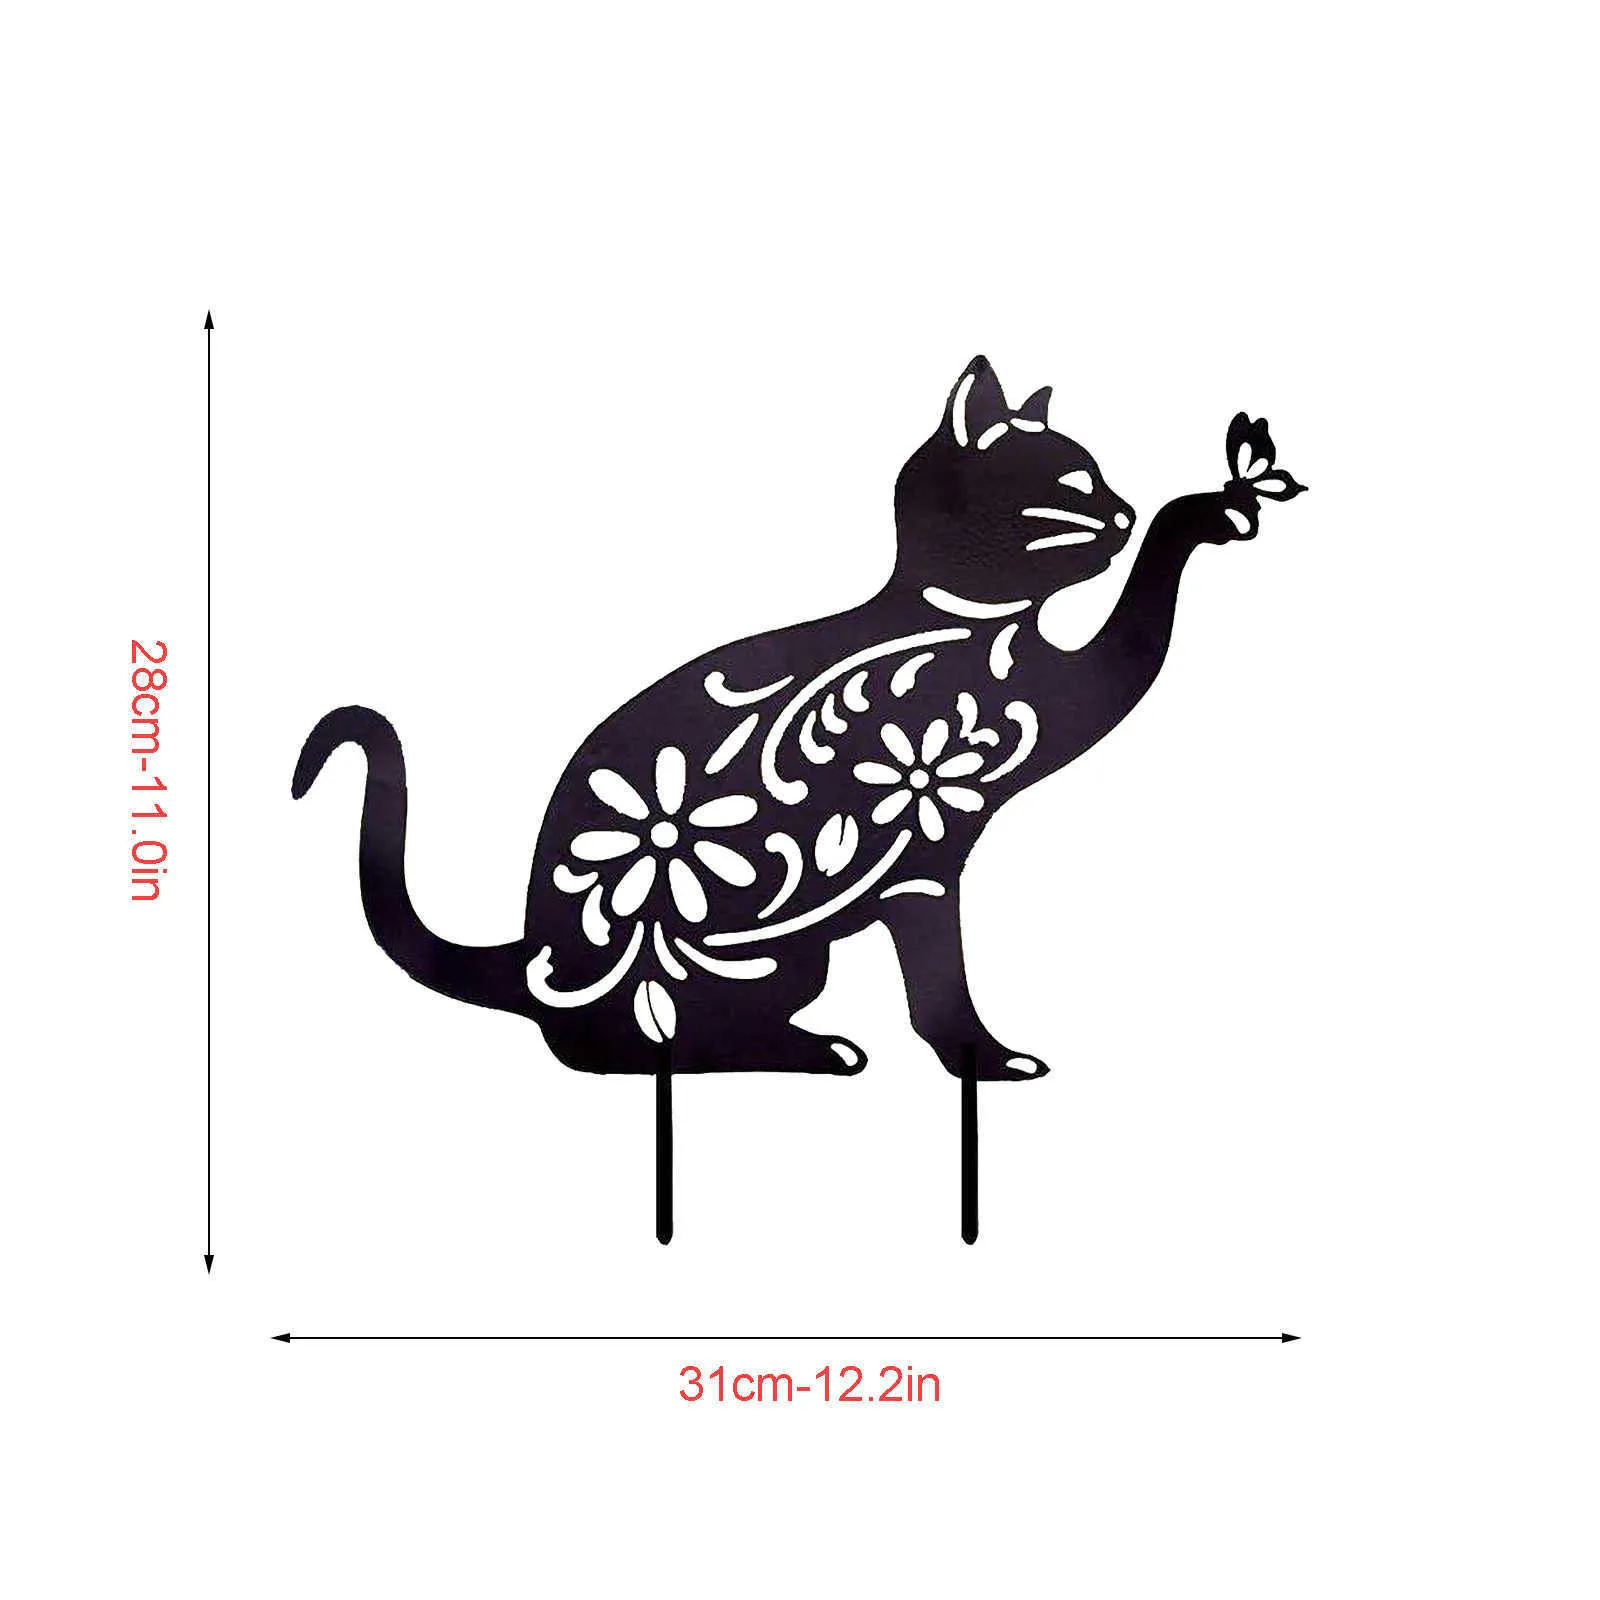 Cat And Butterfly Yard Art Metal Hollow Out Cat Ornaments Garden Decoration Outdoor Wrought Iron Cat Plugin Backyard Decoration Q7014428